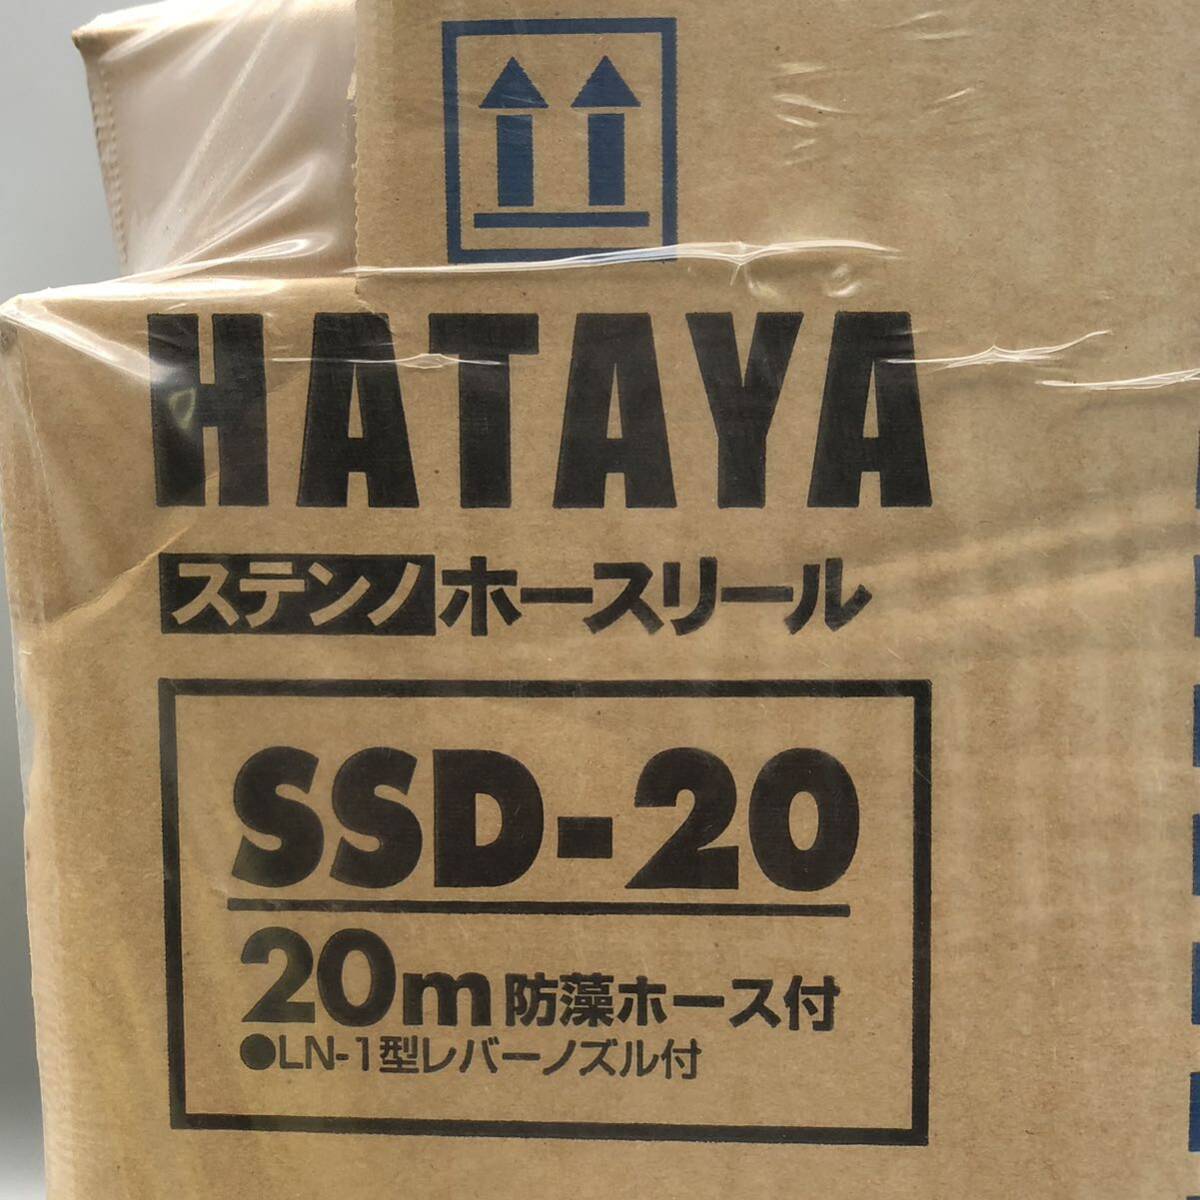 [ new goods unused unopened ] HATAYA is Taya stain no hose reel SSD-20 20m.. hose attaching LN-1 type lever nozzle volume taking .ko Logo ro guide field shop 